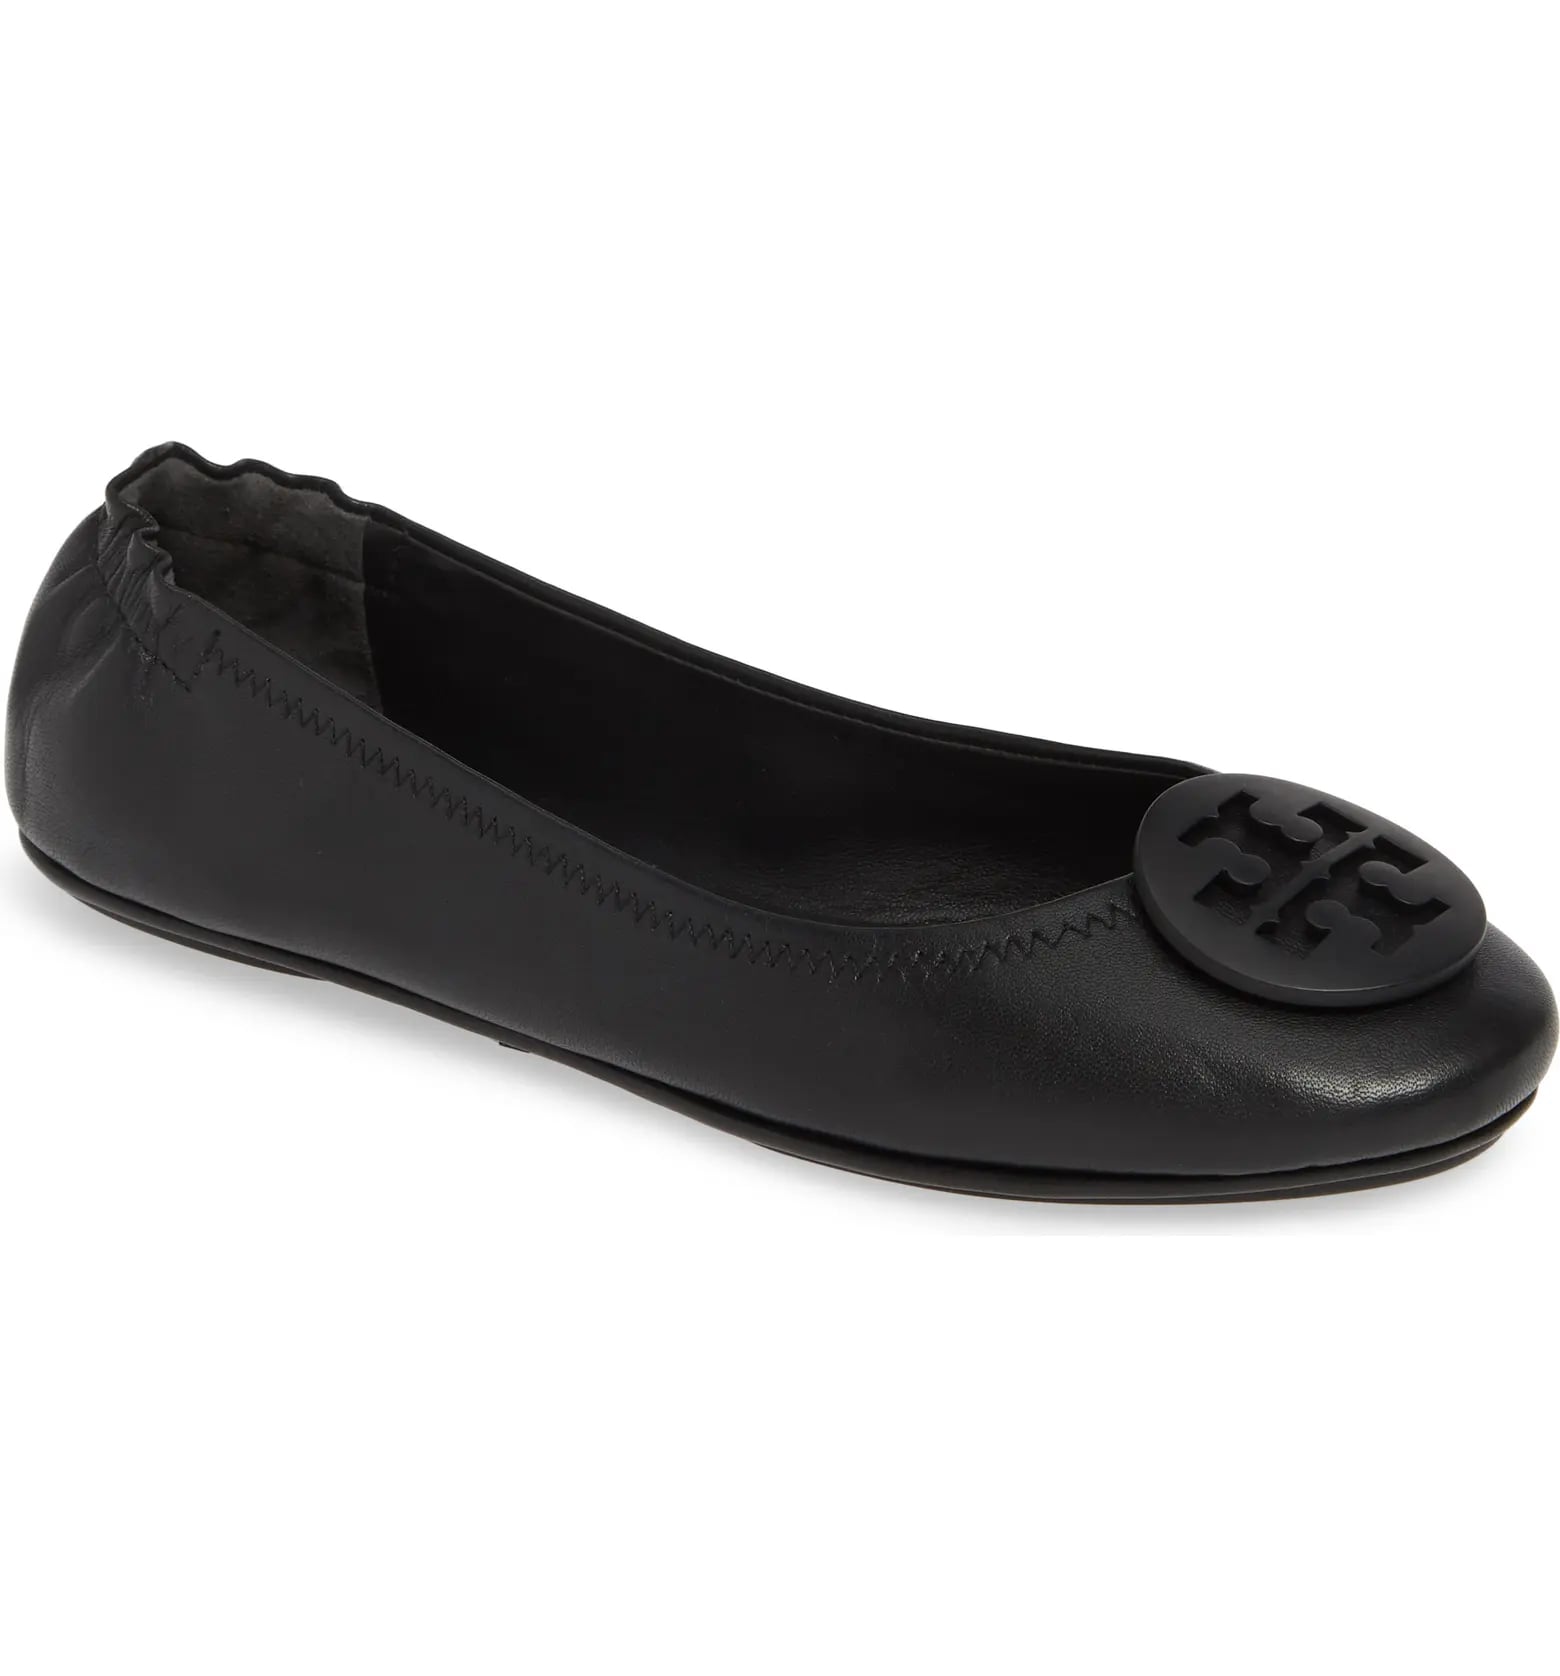 Best Black Rounded Flats: Tory Burch Minnie Travel Ballet Flats | Black  Flats Are a Timeless Essential — Stock Up on Our 18 Favorites | POPSUGAR  Fashion Photo 15